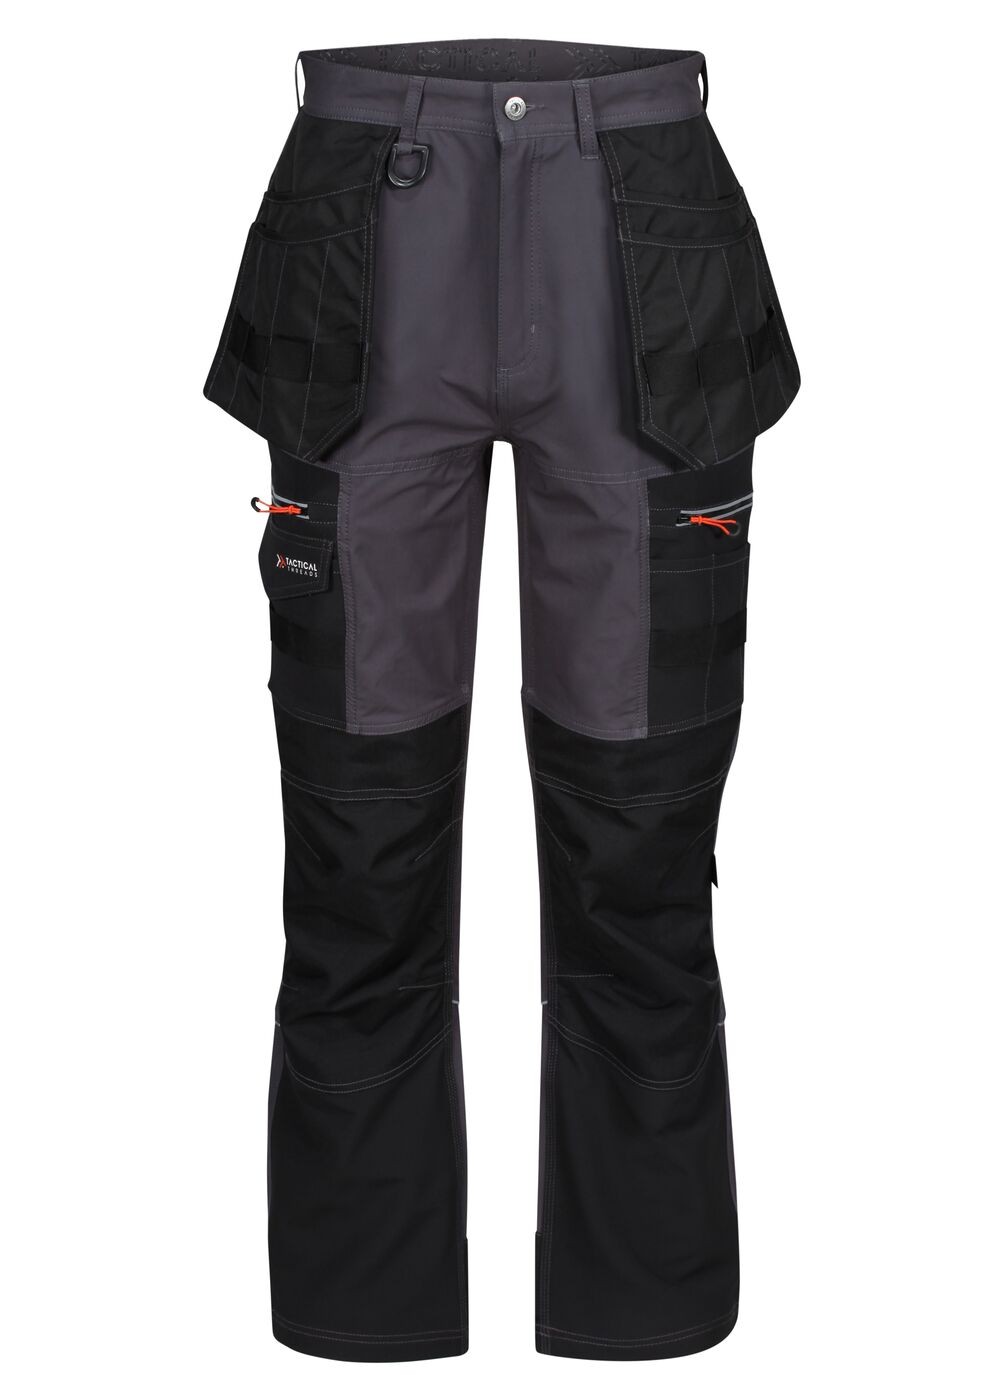 IMPACT Work Pants  Thermal Lined GreyBlack  Phillips Menswear